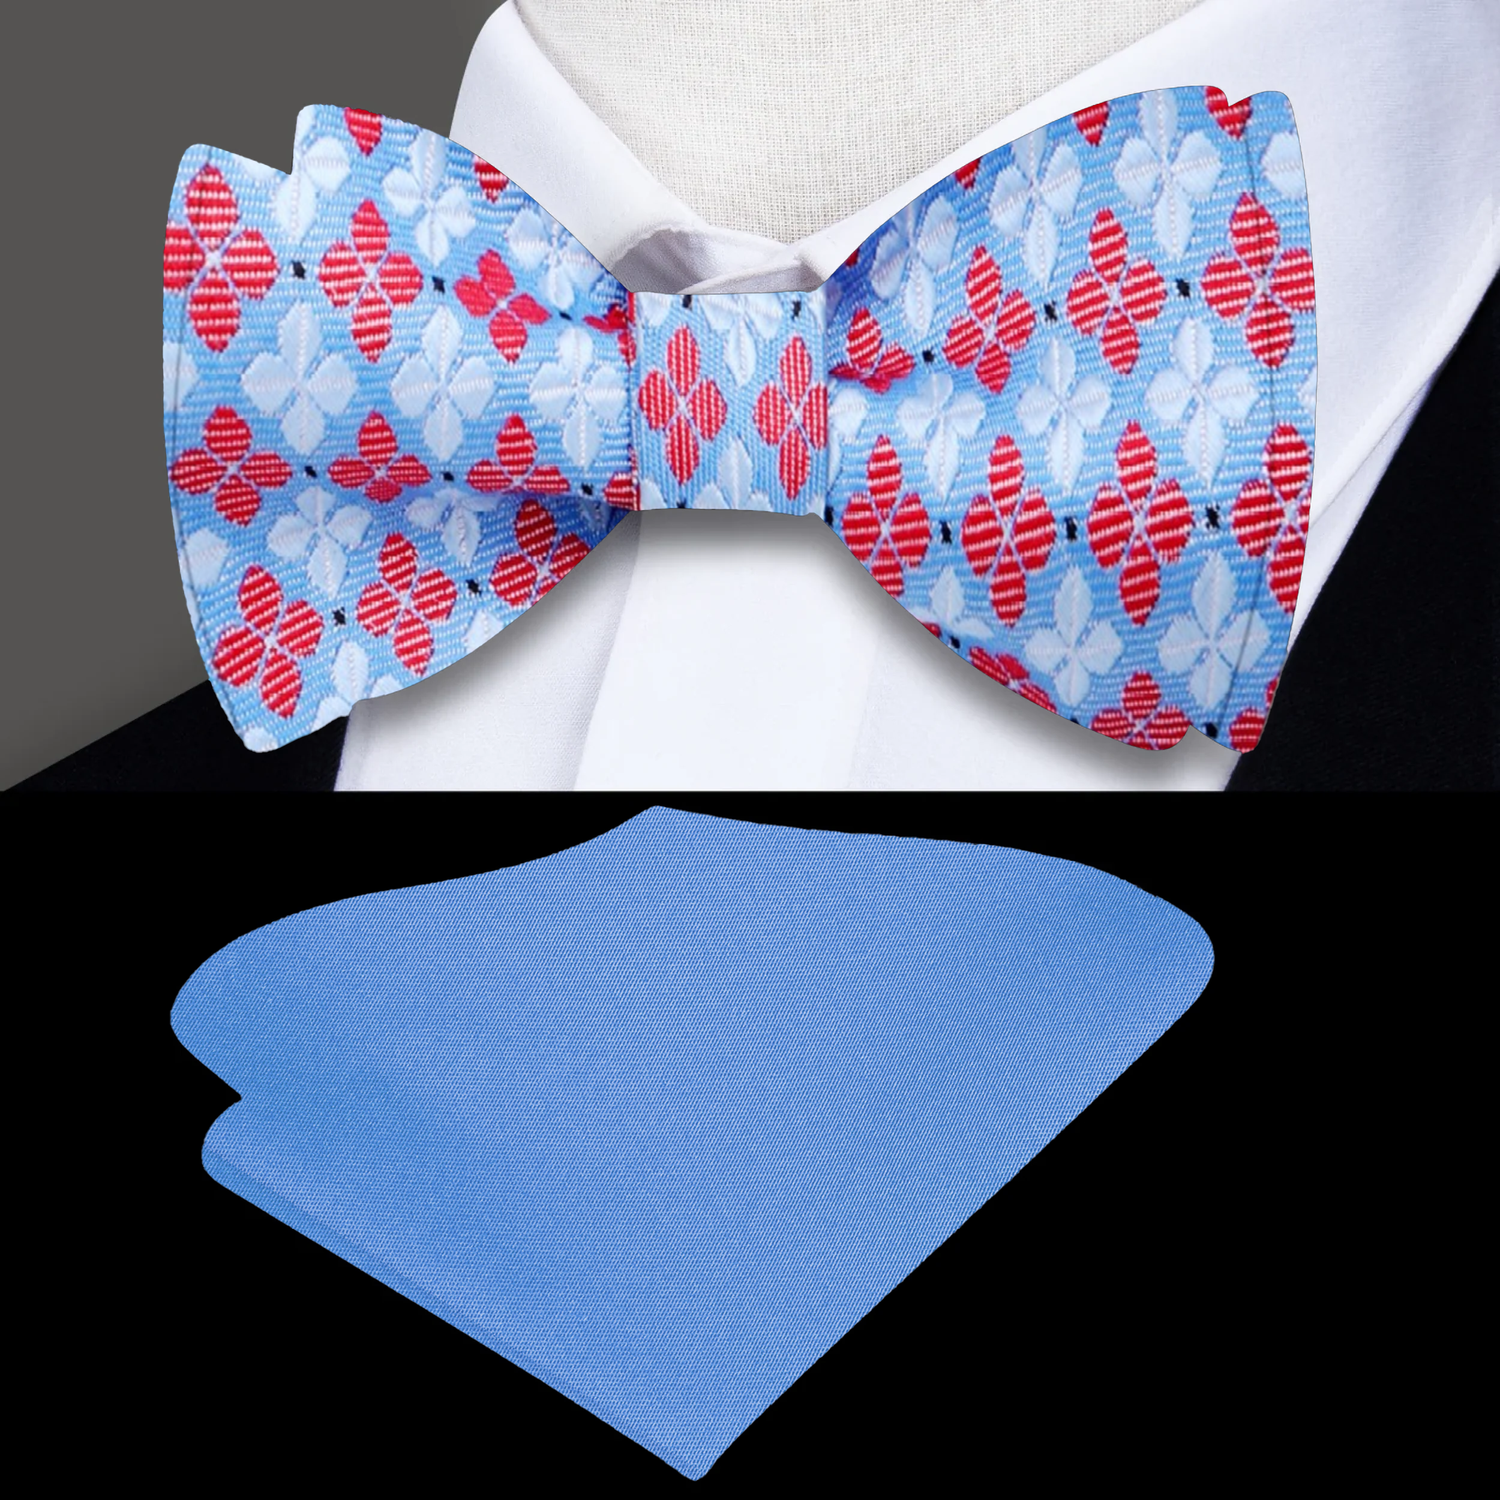 Light Blue, Red, White Clover Bow Tie and Blue Square